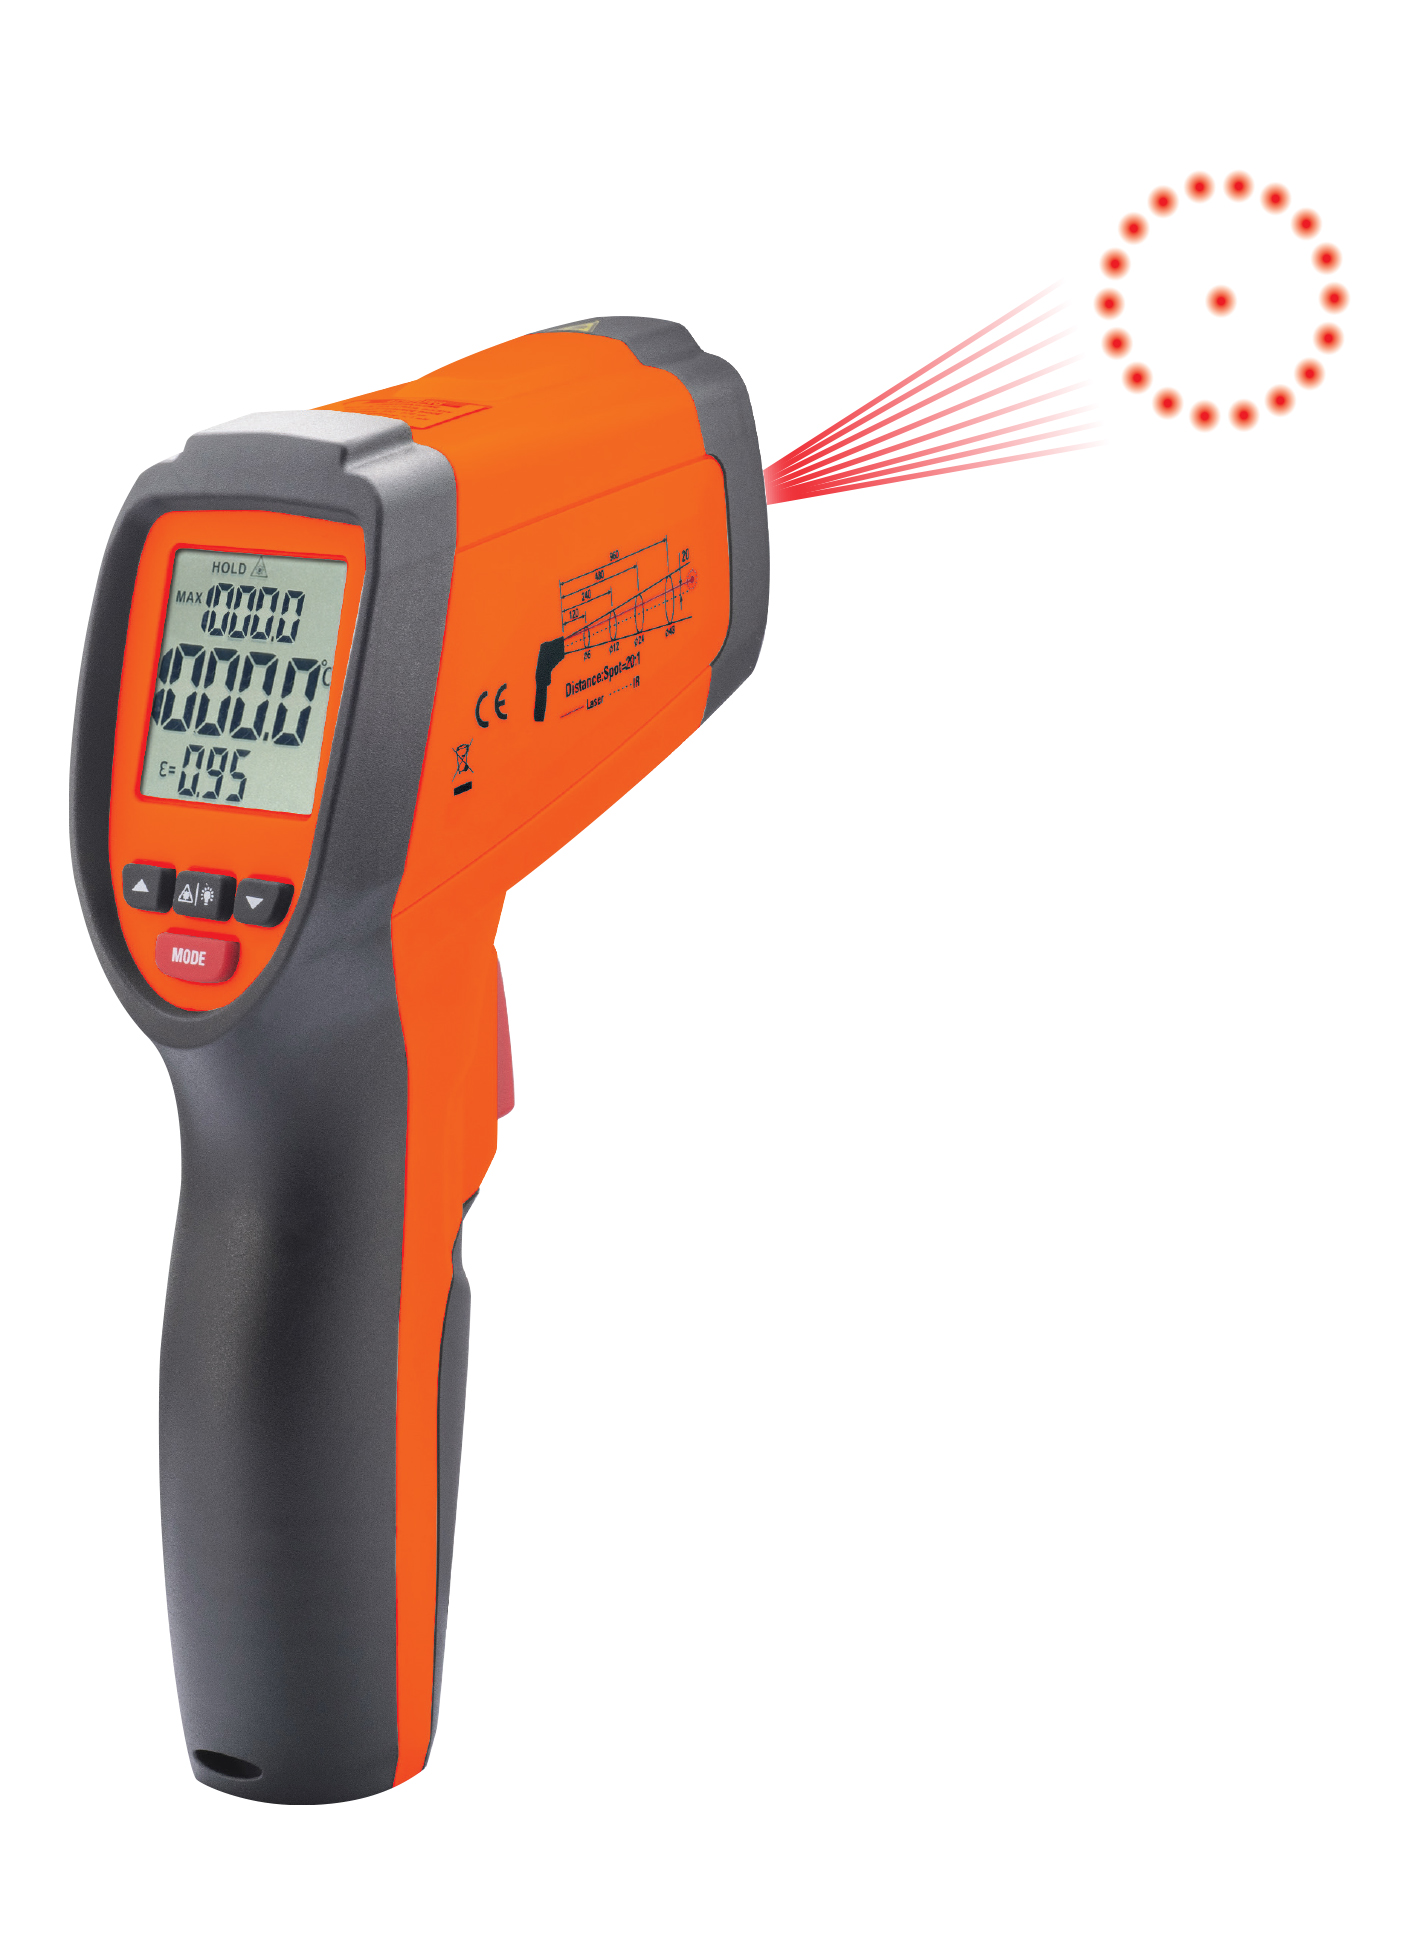 ZI-9699 Infrared Thermometer 1000C